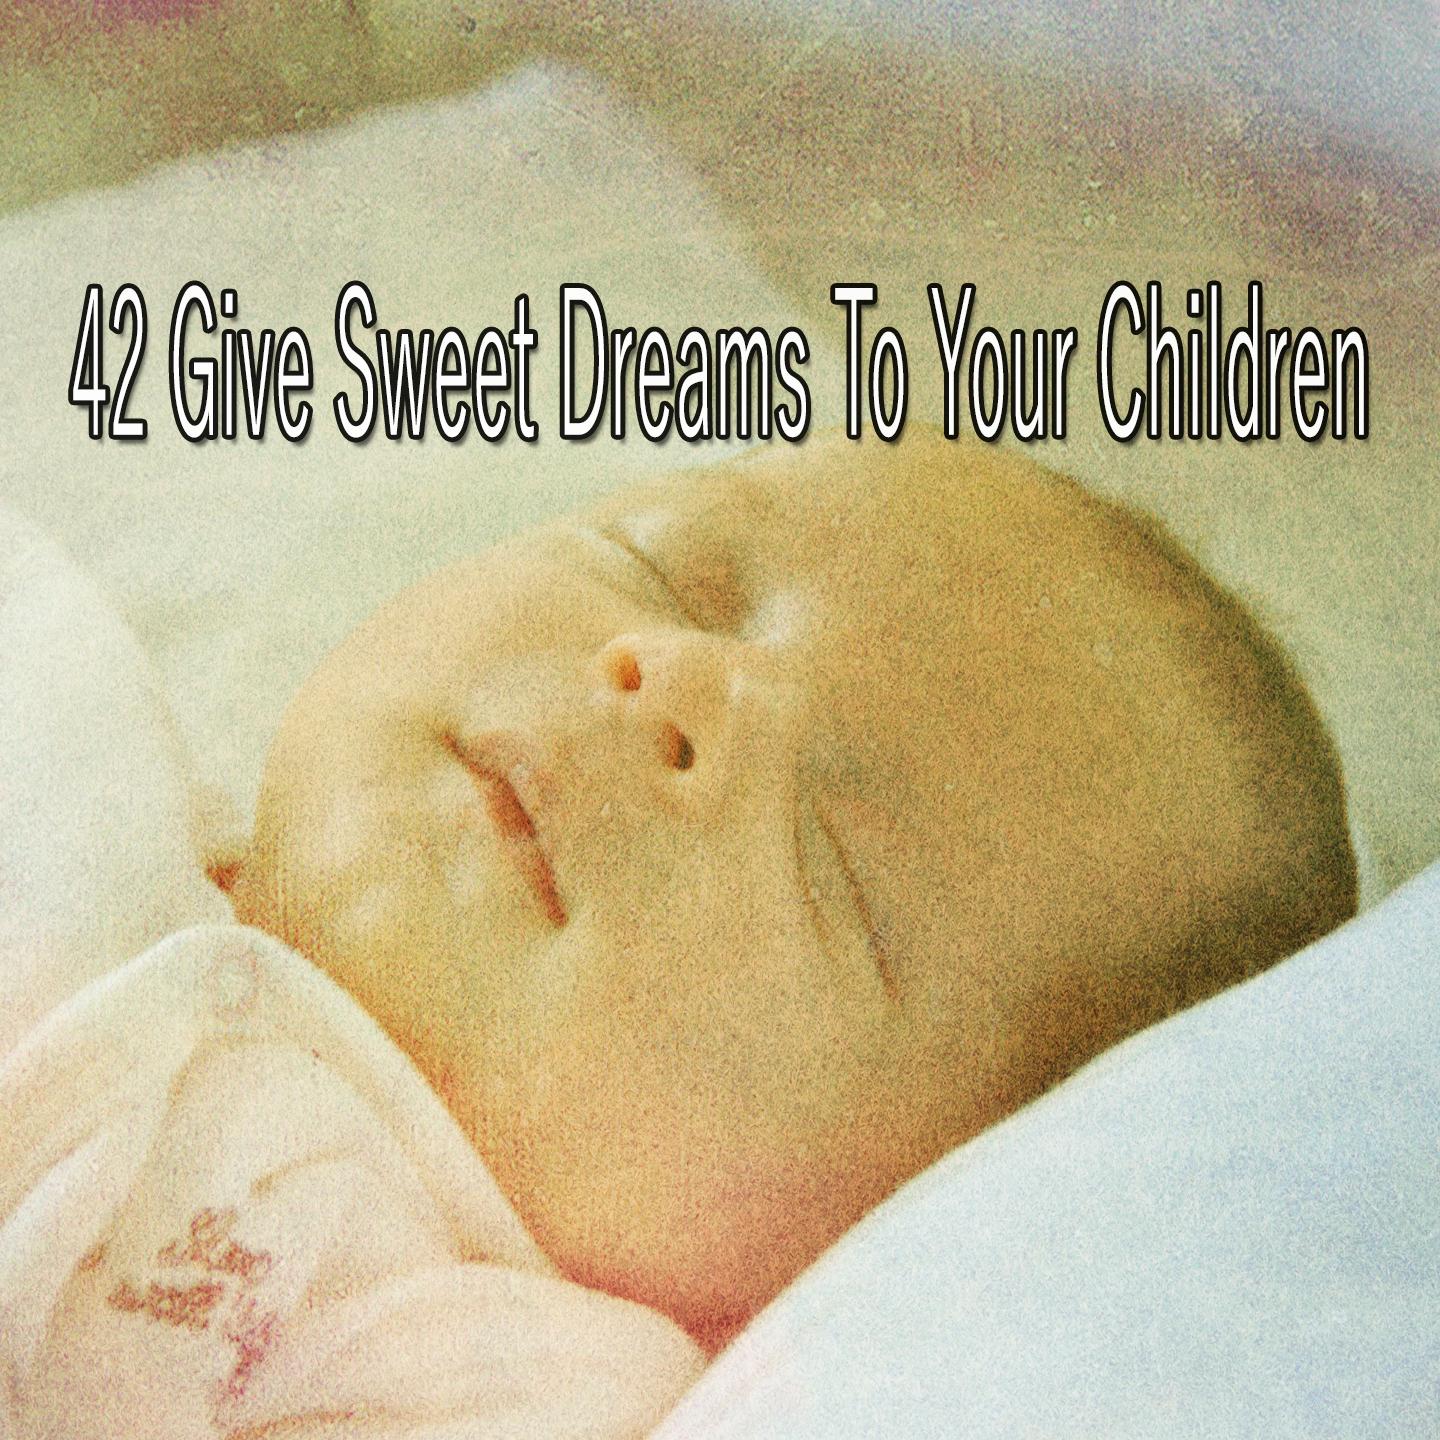 42 Give Sweet Dreams to Your Children